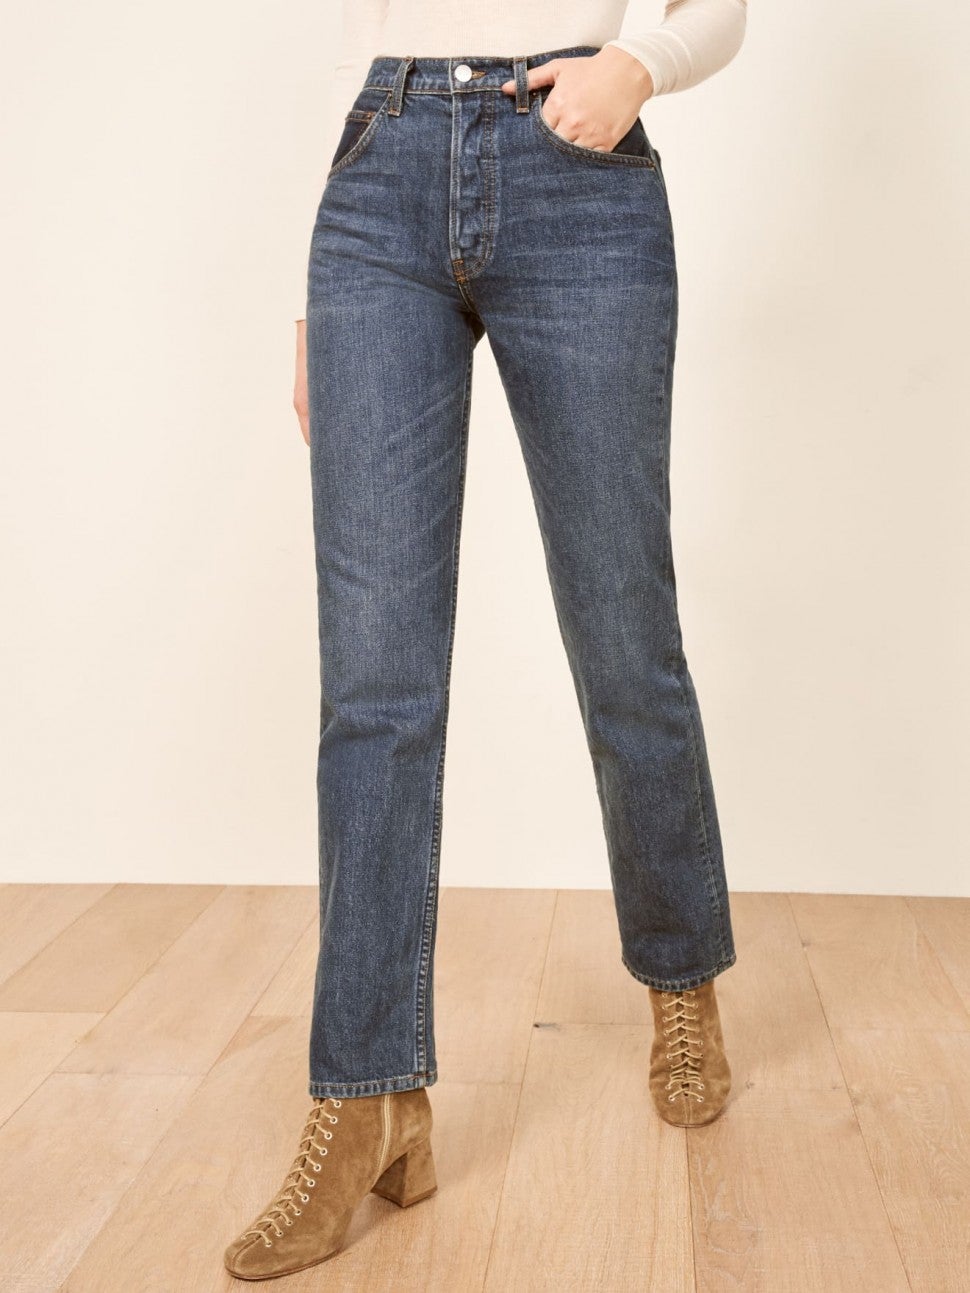 Reformation straight cynthia relaxed jean